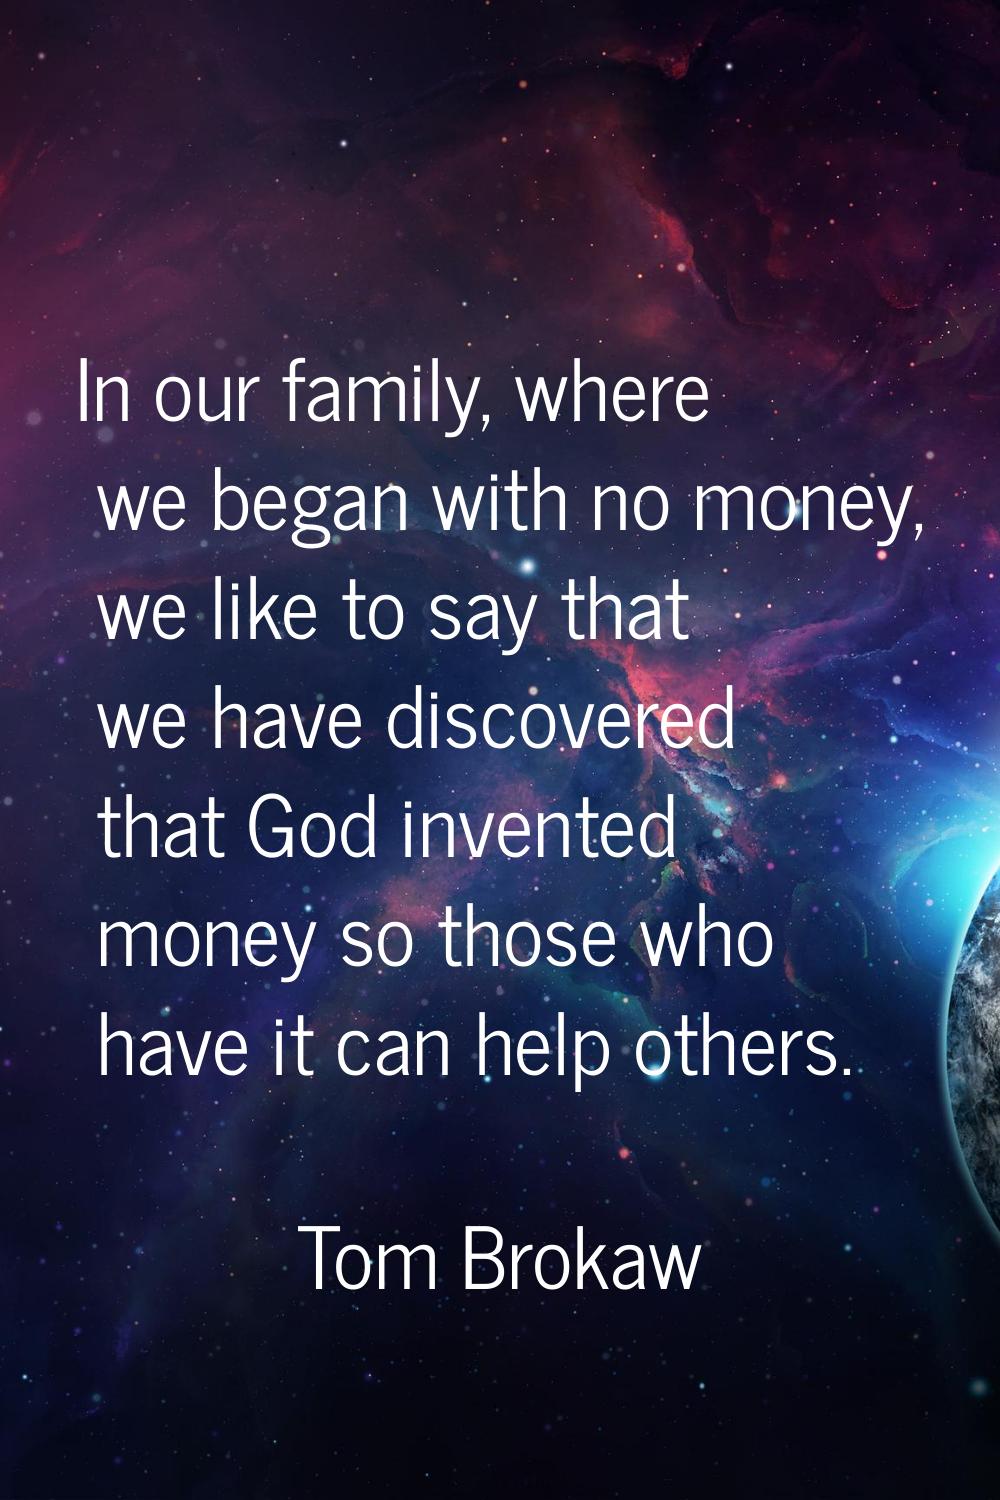 In our family, where we began with no money, we like to say that we have discovered that God invent